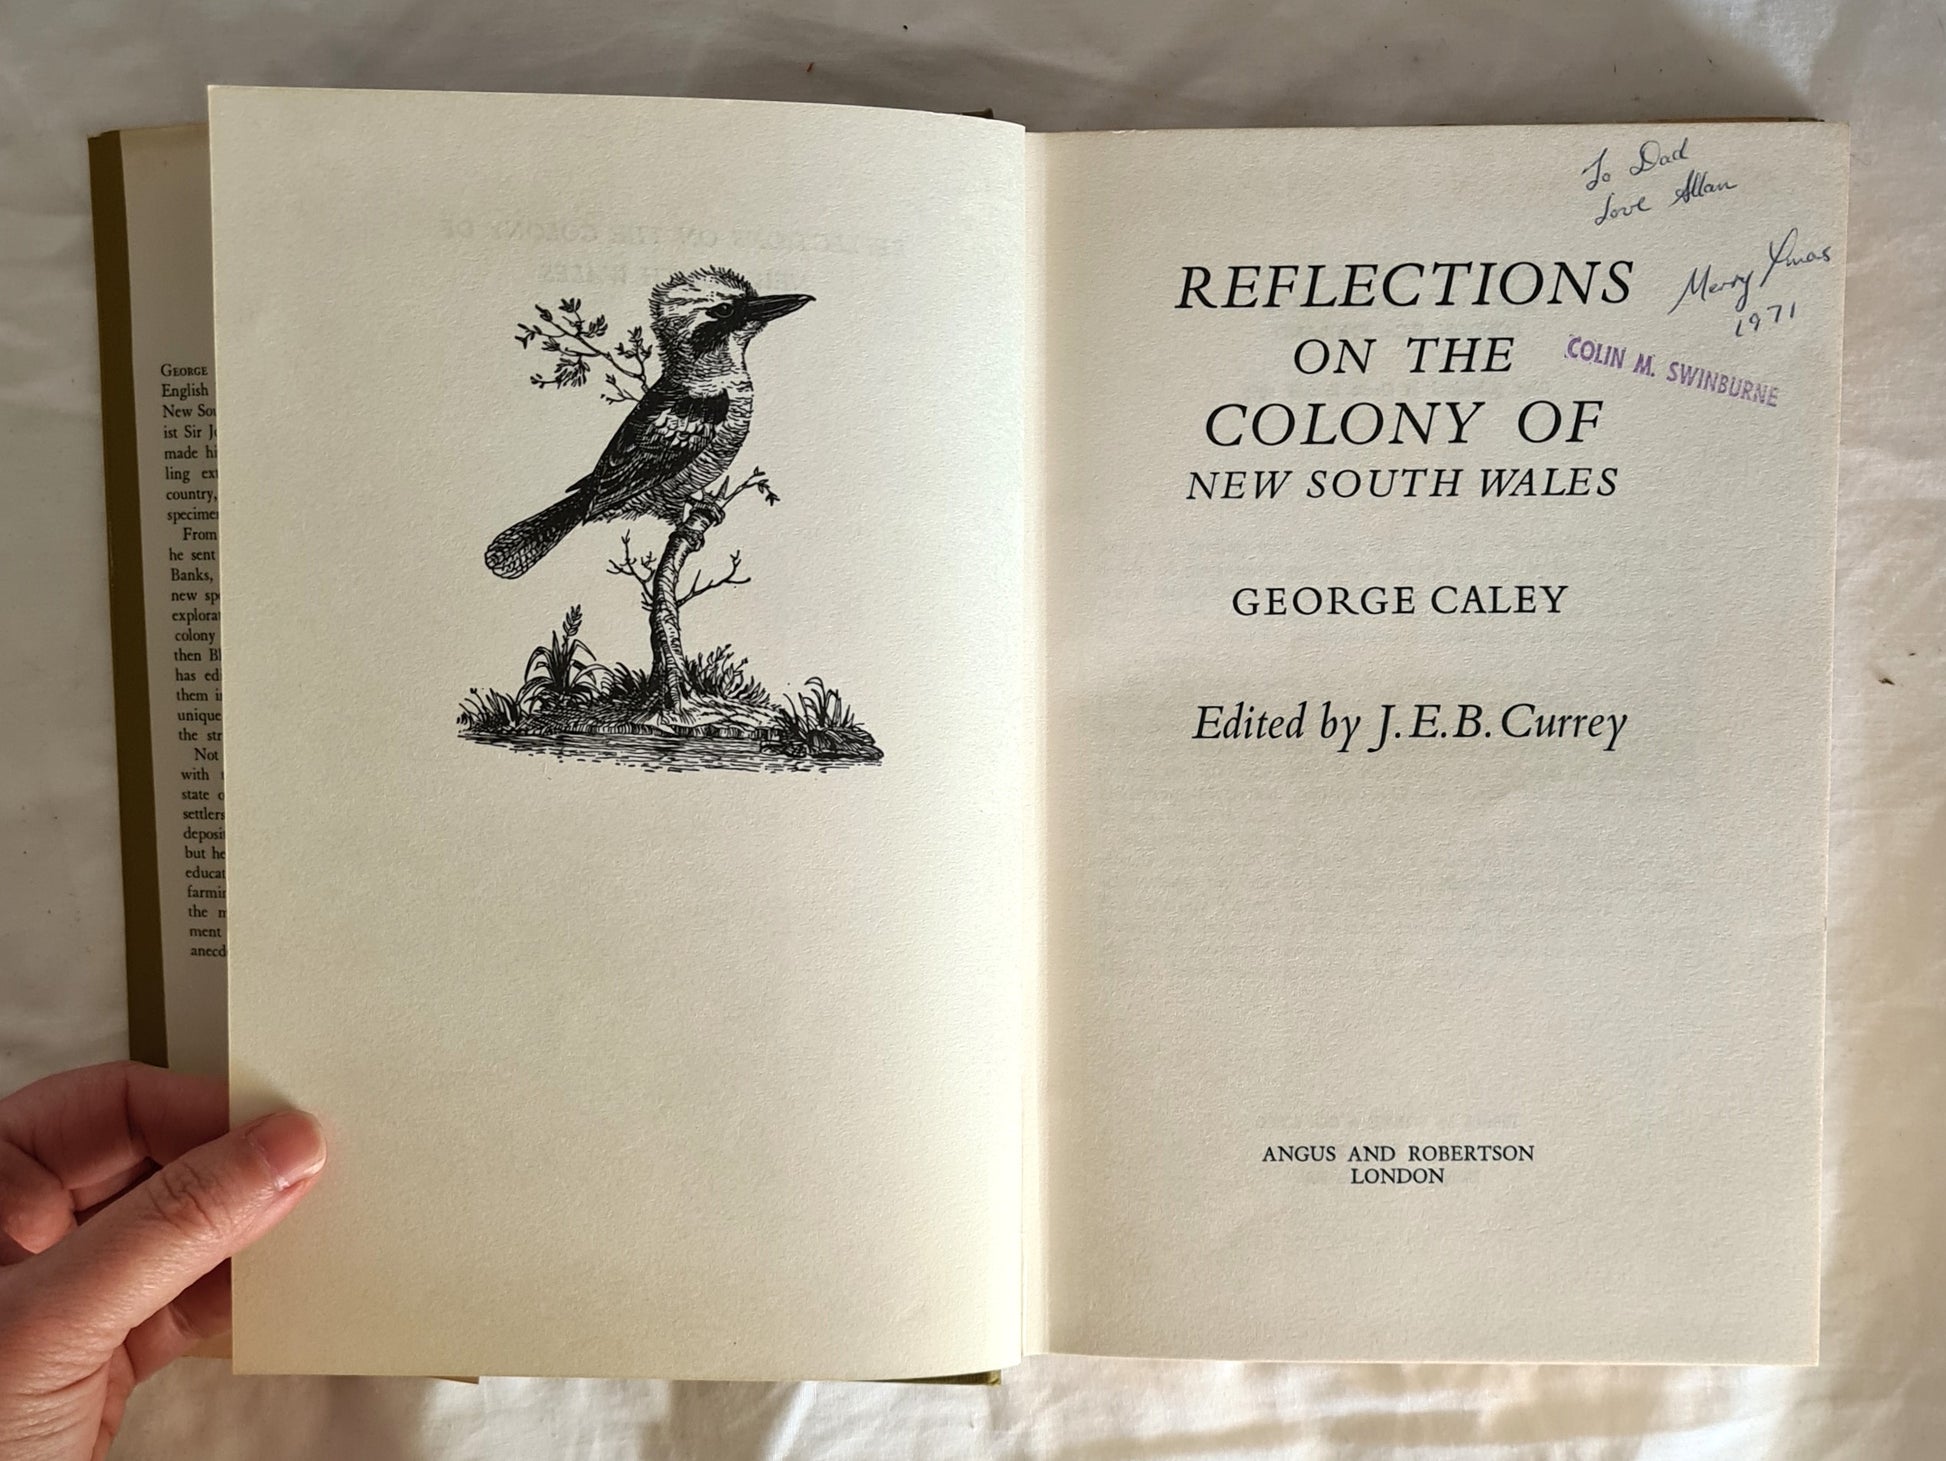 Reflections of the Colony of New South Wales  by George Caley  edited by J. E. B. Currey